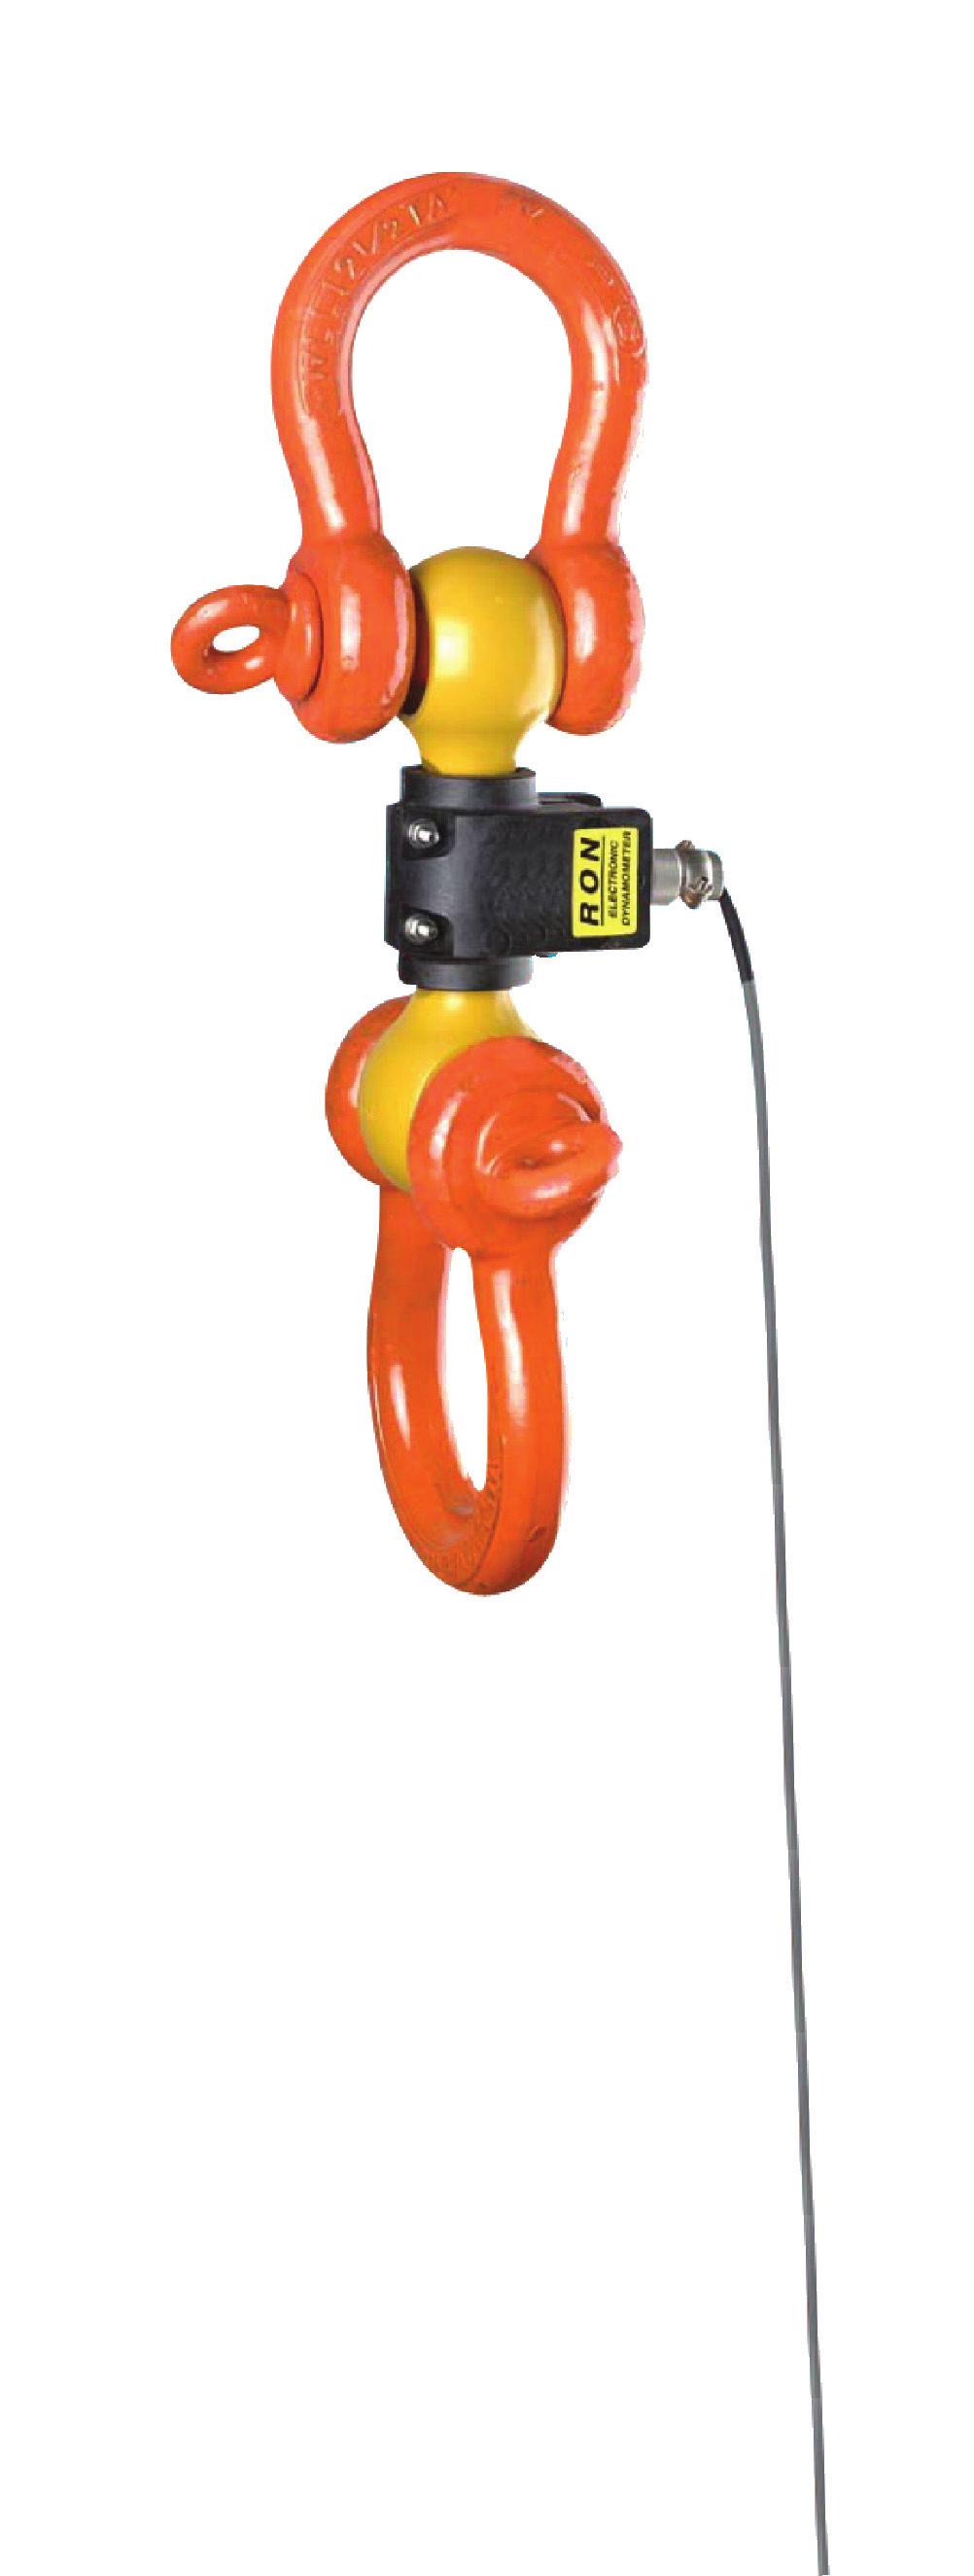 Ron 00 Shackle Type Dynamometer with Remote Indicator Short delivery time: Usually - 4 business days.